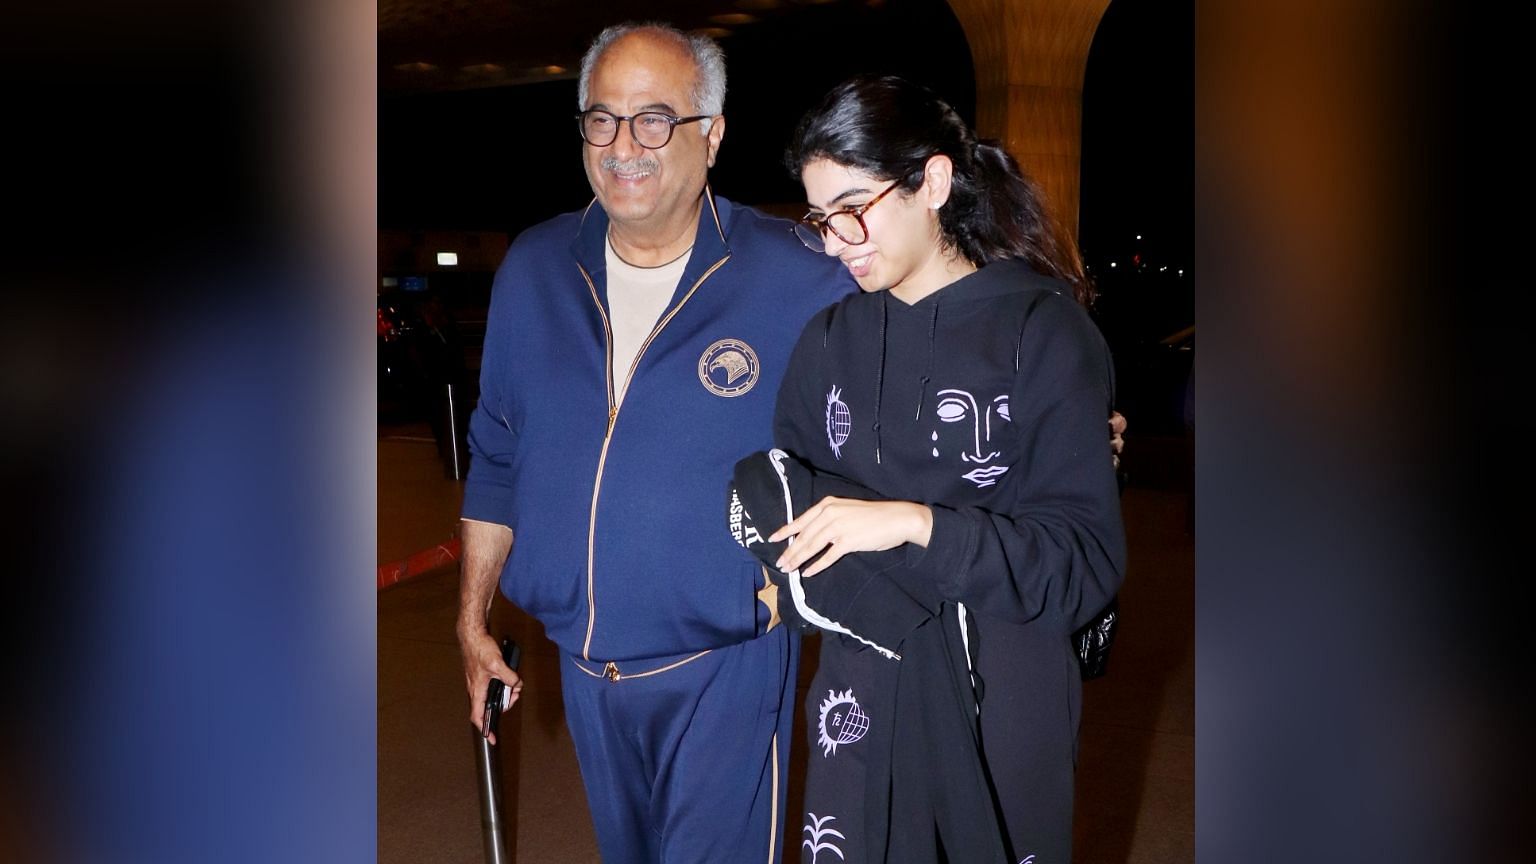 Boney Kapoor leaves with his daughter Khushi.